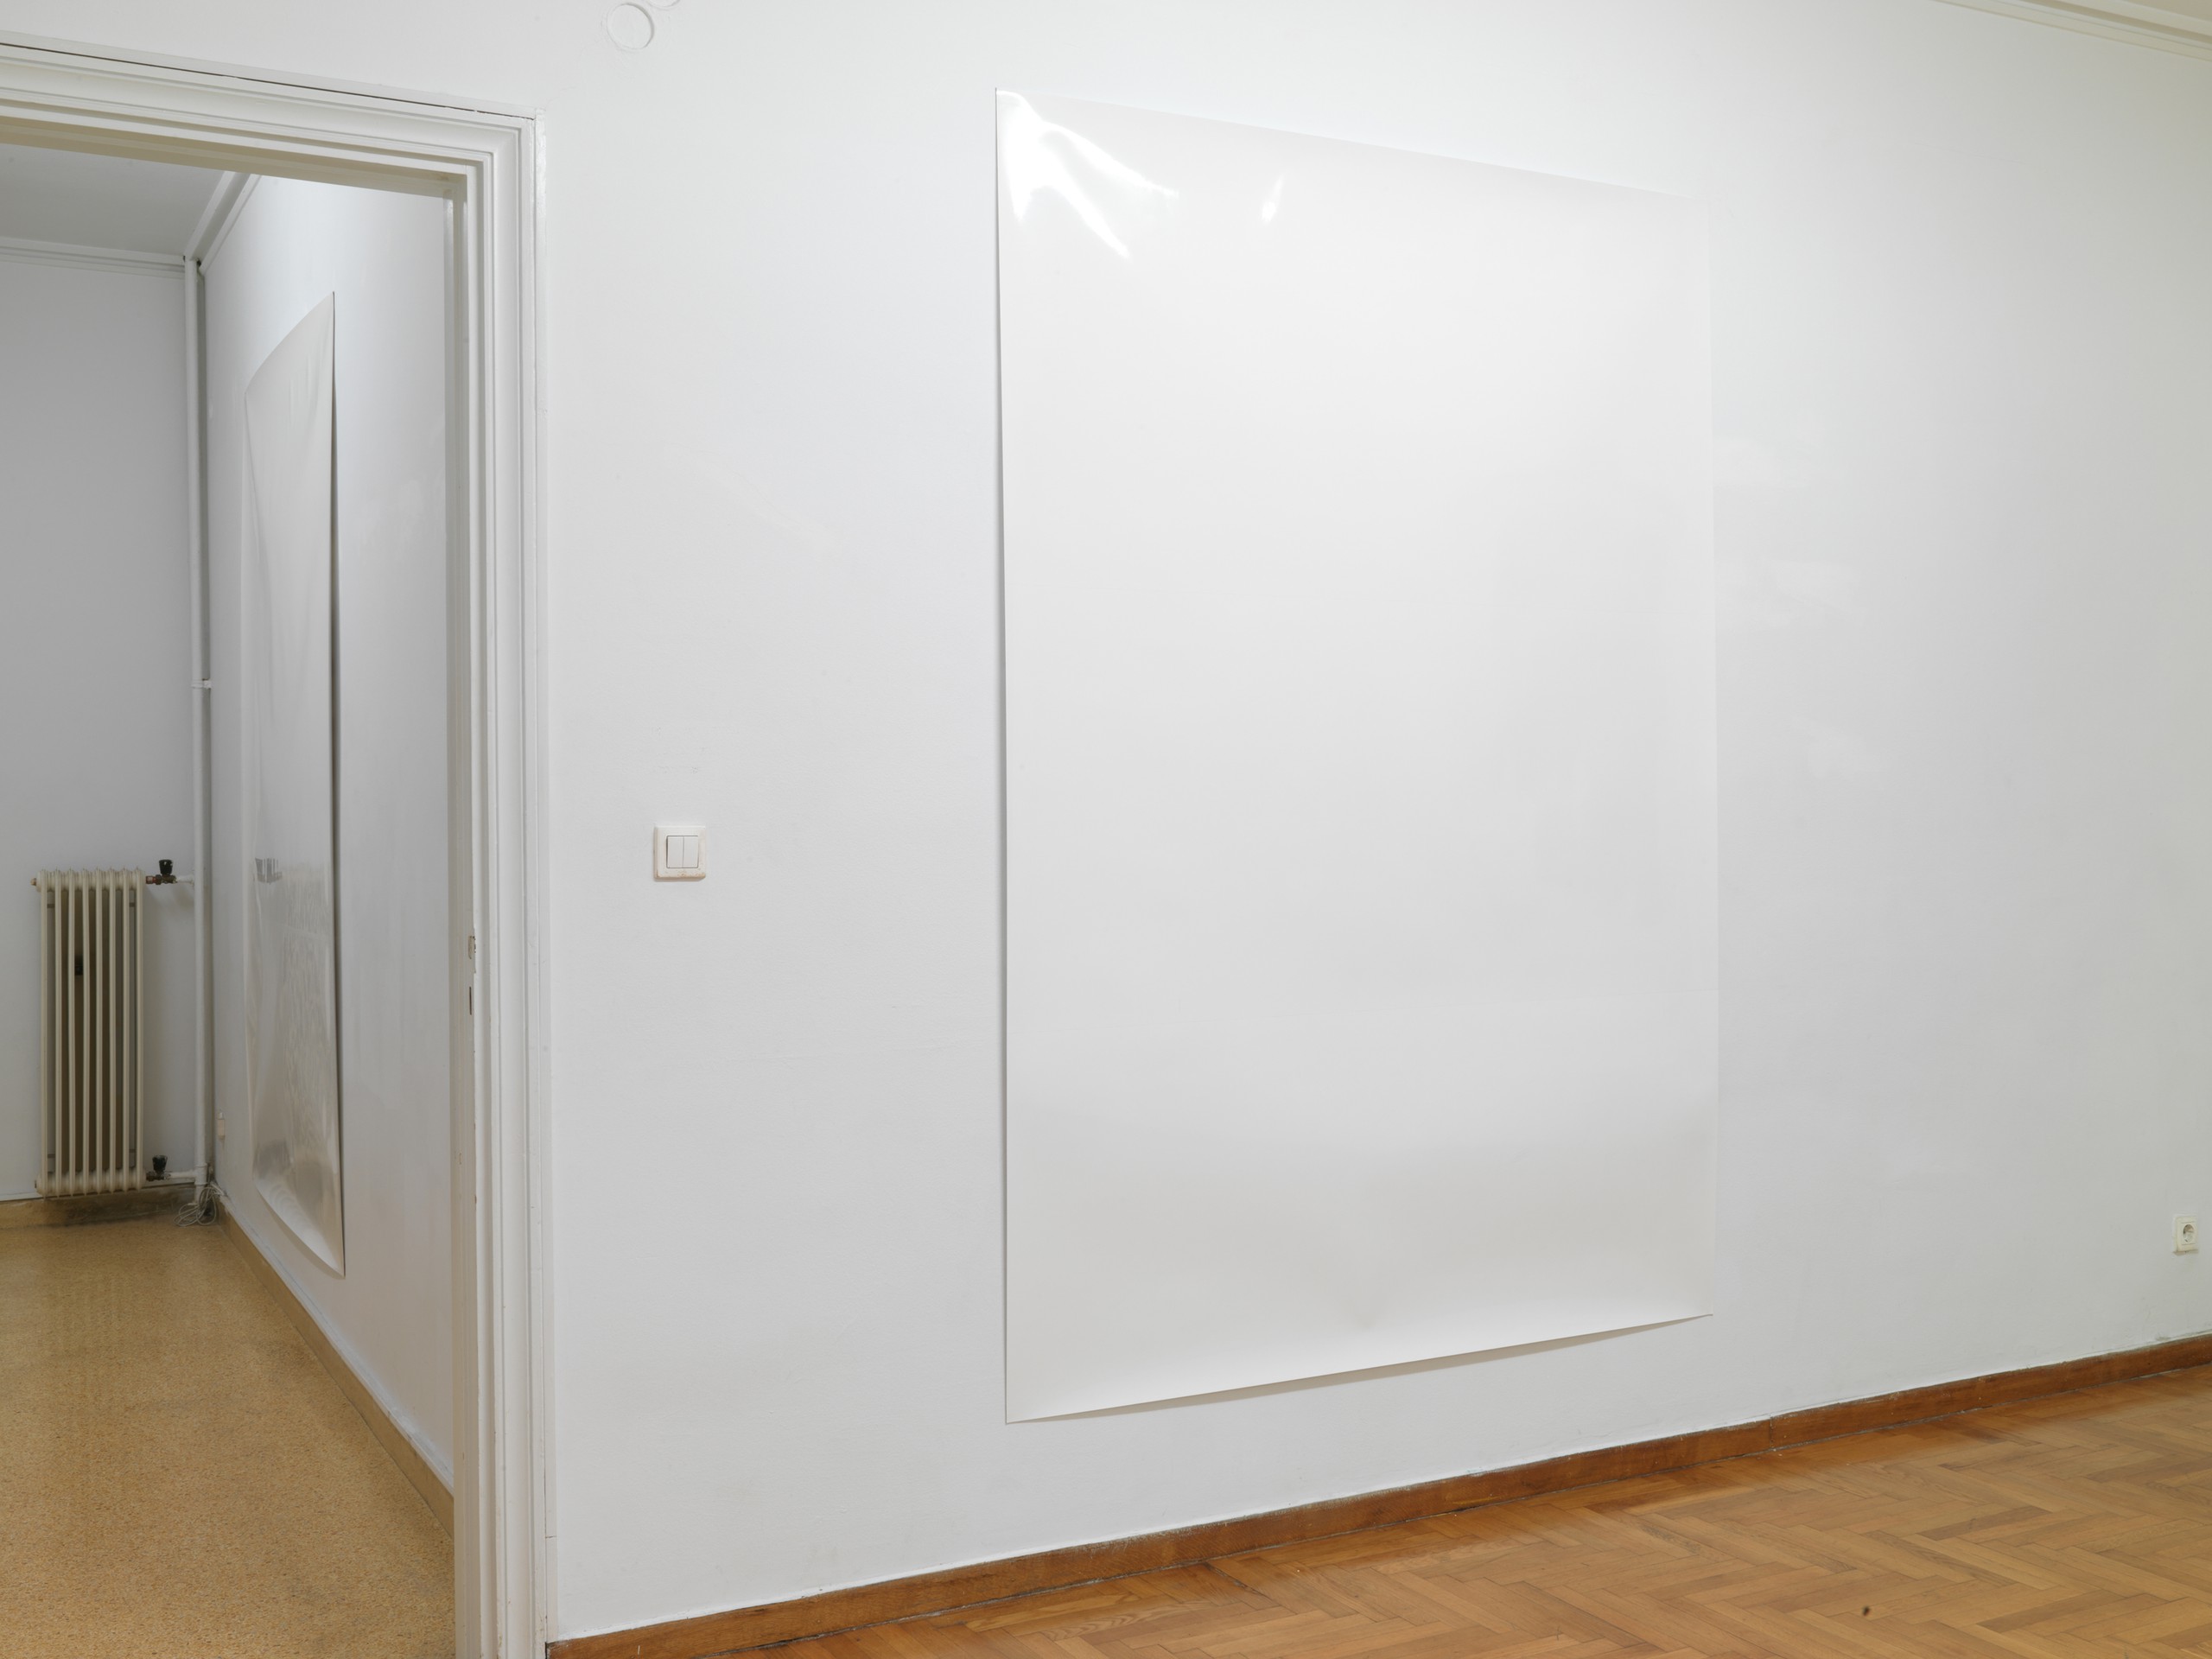 Installation view, Ύλη[matter]HYLE, Athens, 2020